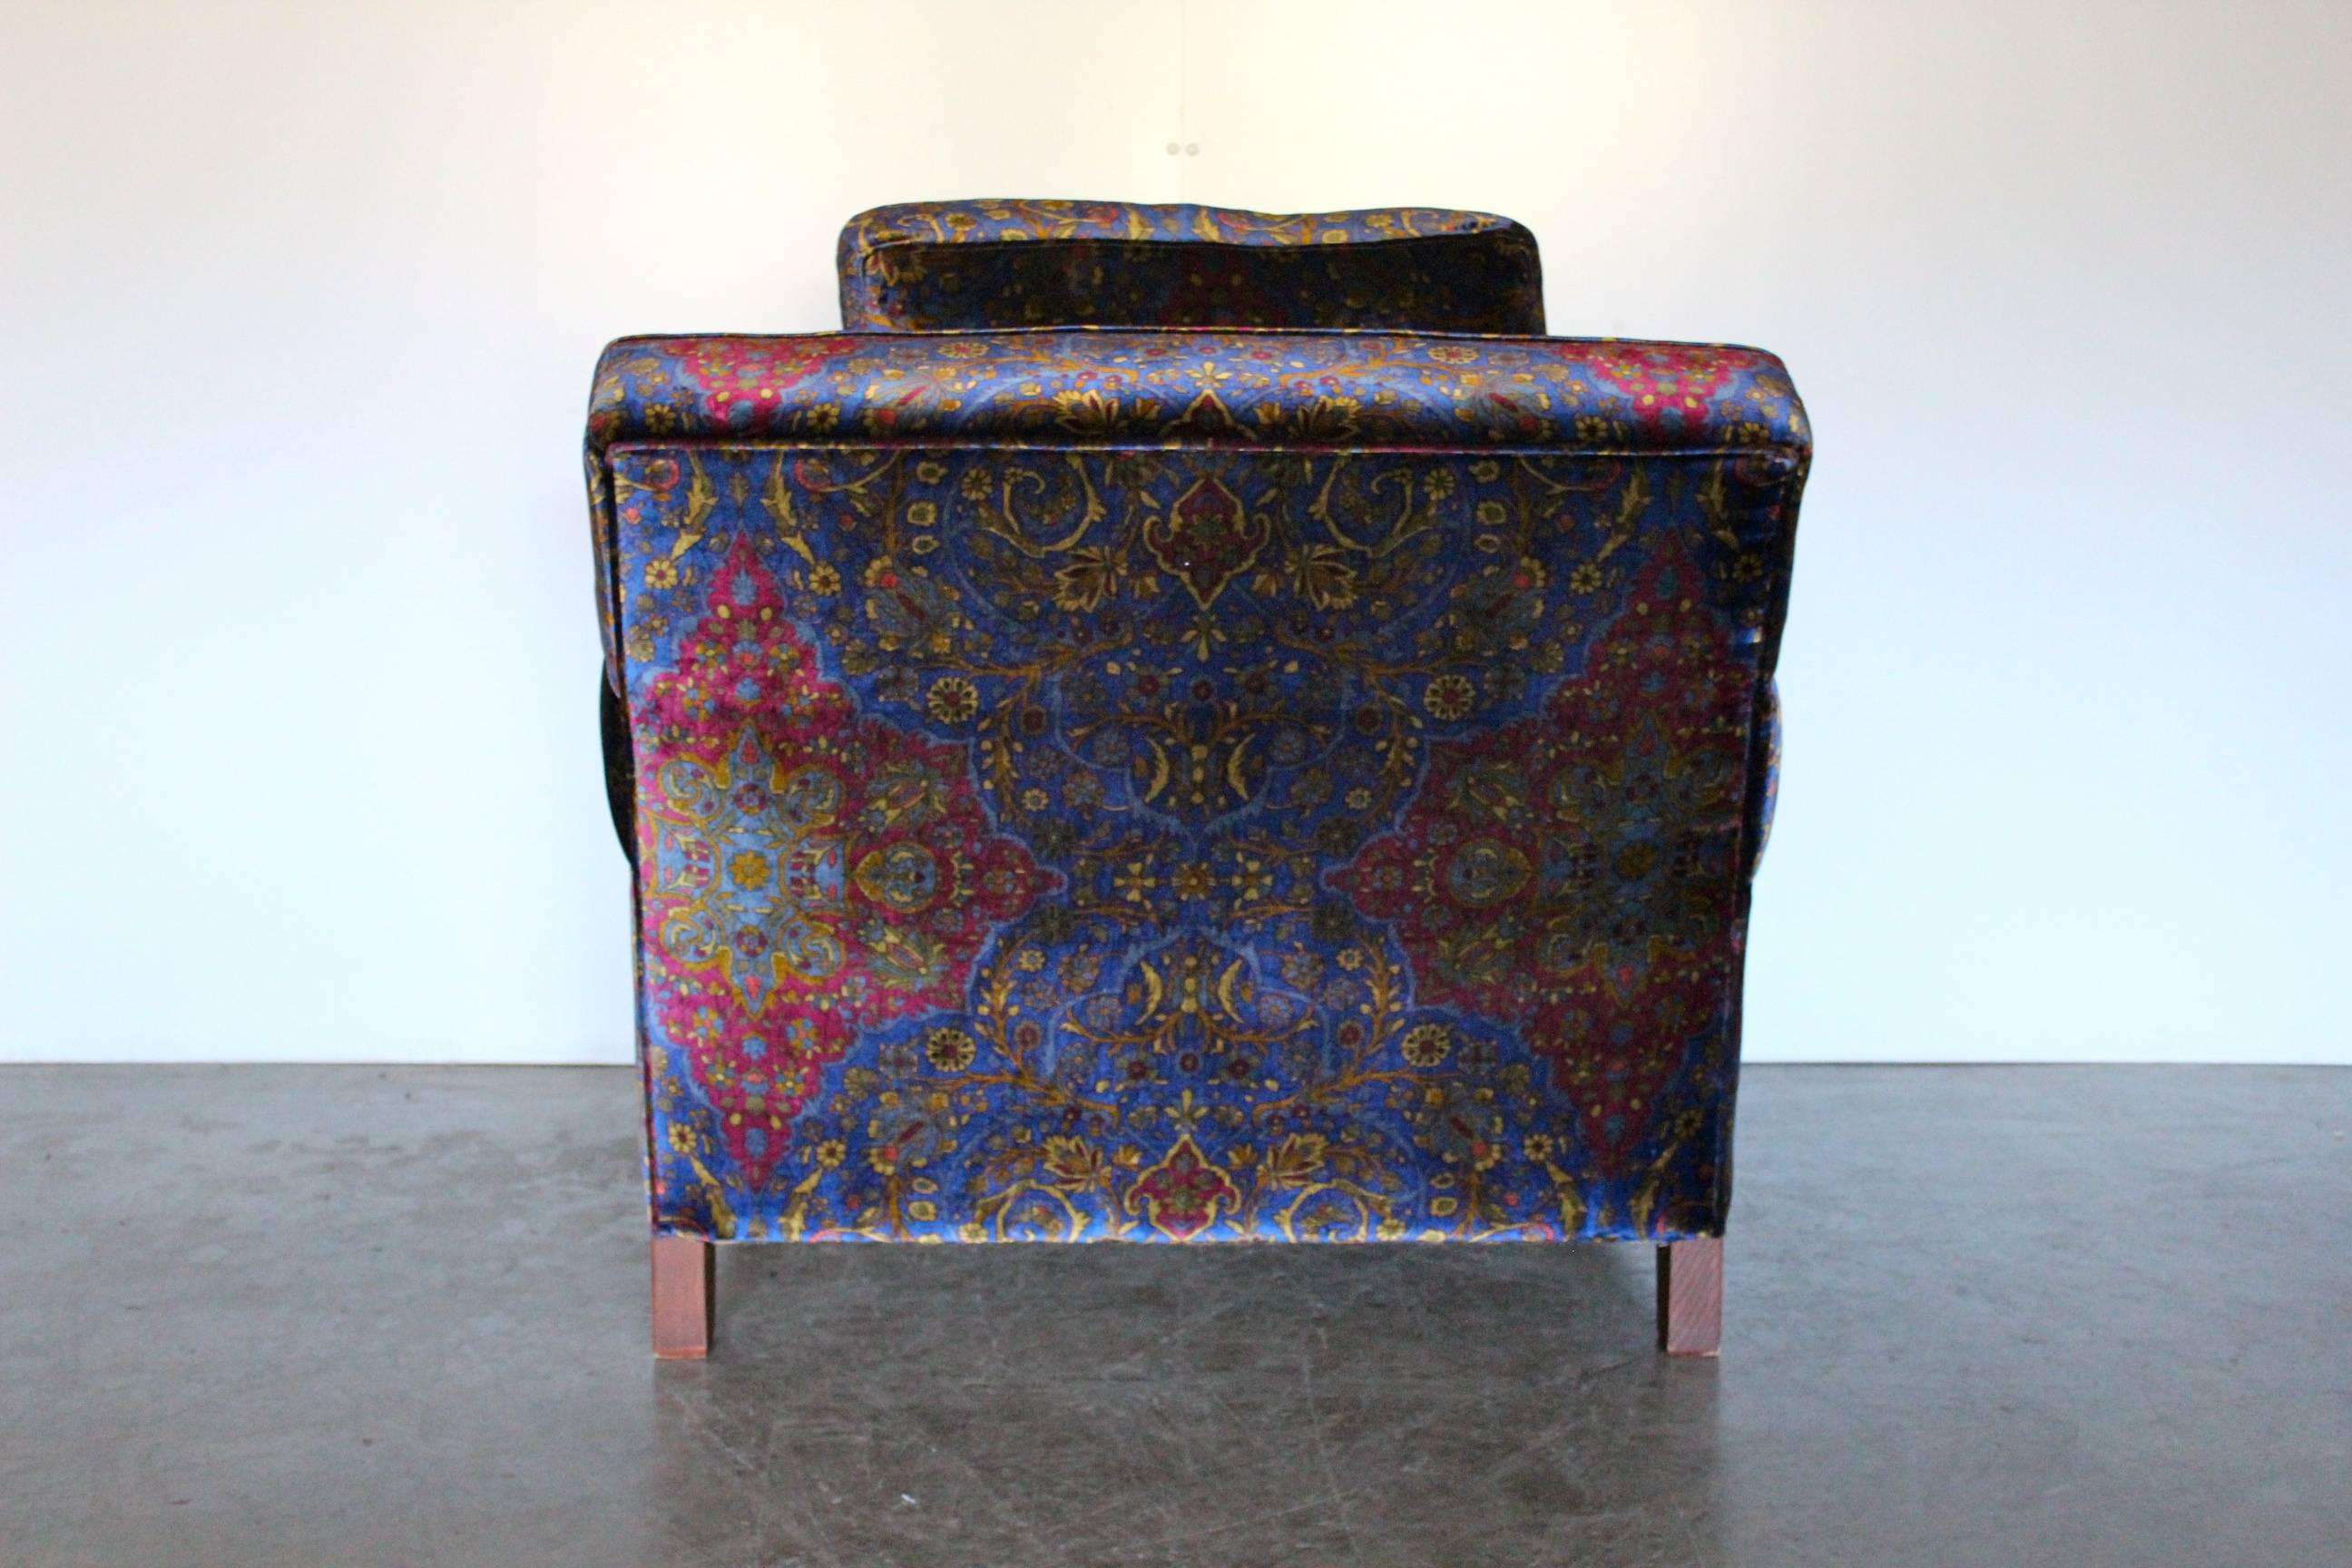 On offer on this occasion is an incredibly rare, large Ralph Lauren “Club” armchair (one of two identical armchairs available currently) dressed in a peerless, top-grade, Ralph Lauren Paisley velvet fabric in a myriad of rich, deep tones.
As you